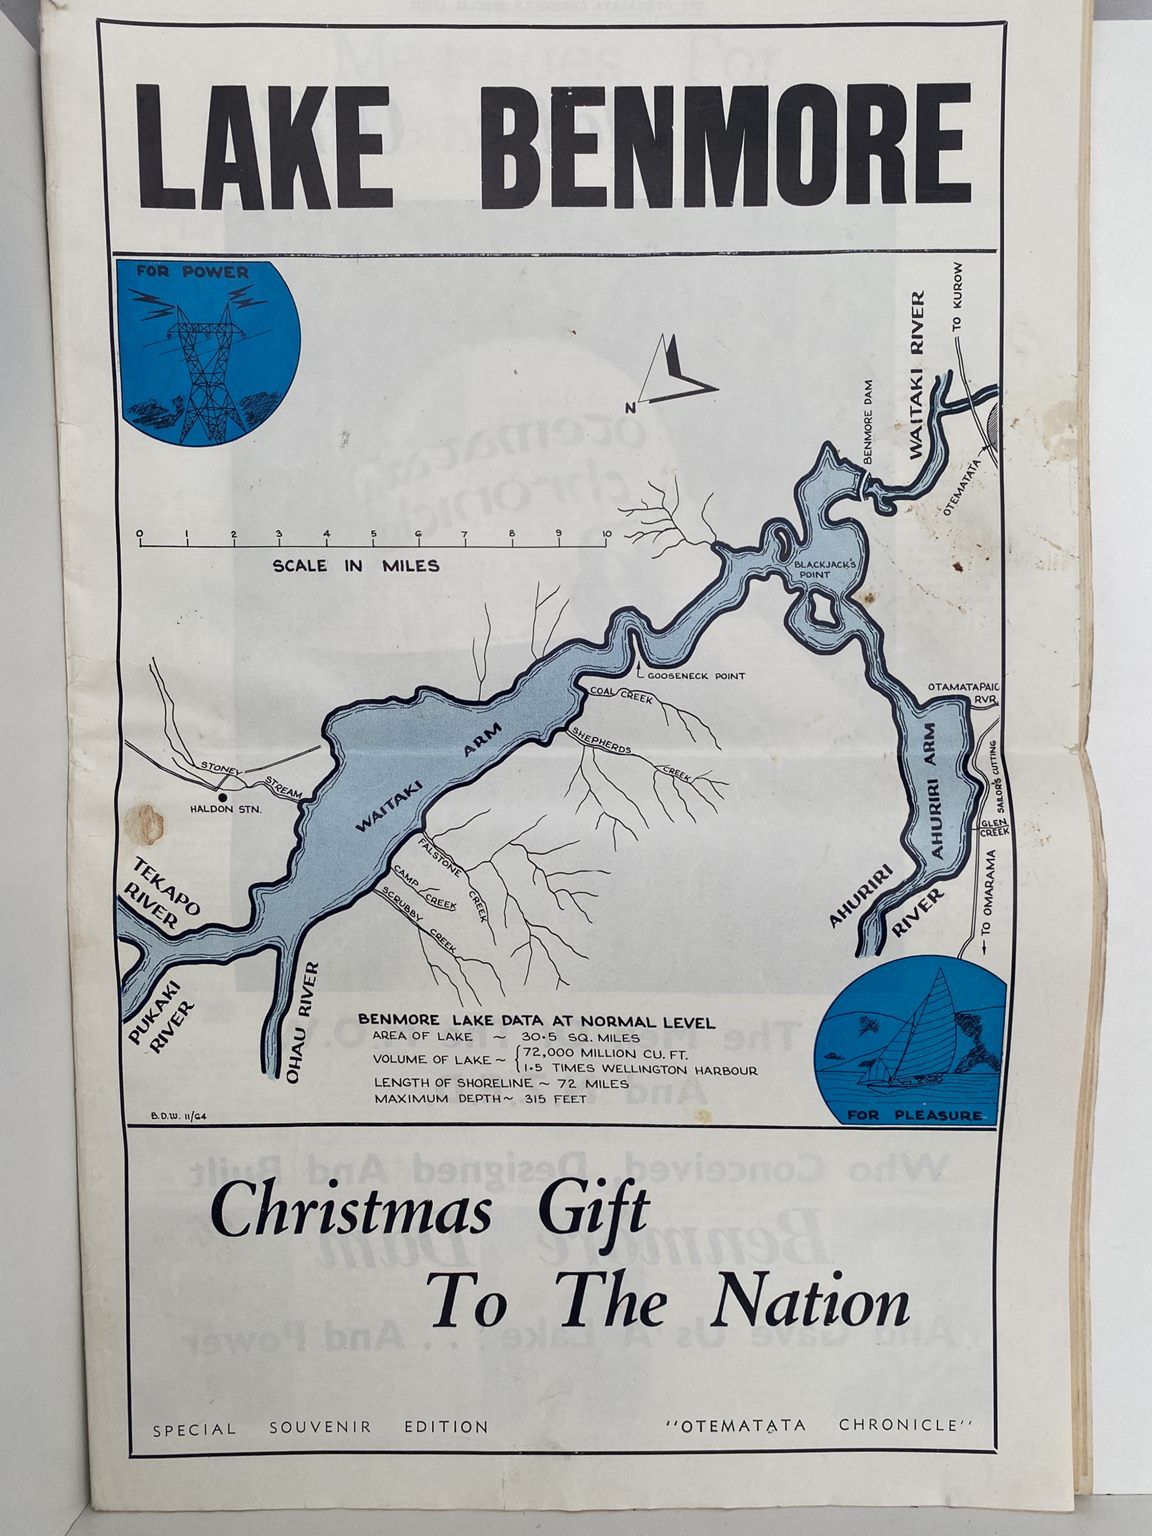 OLD NEWSPAPER: The Otematata Chronicle - Lake Benmore Power Project Opening 1965